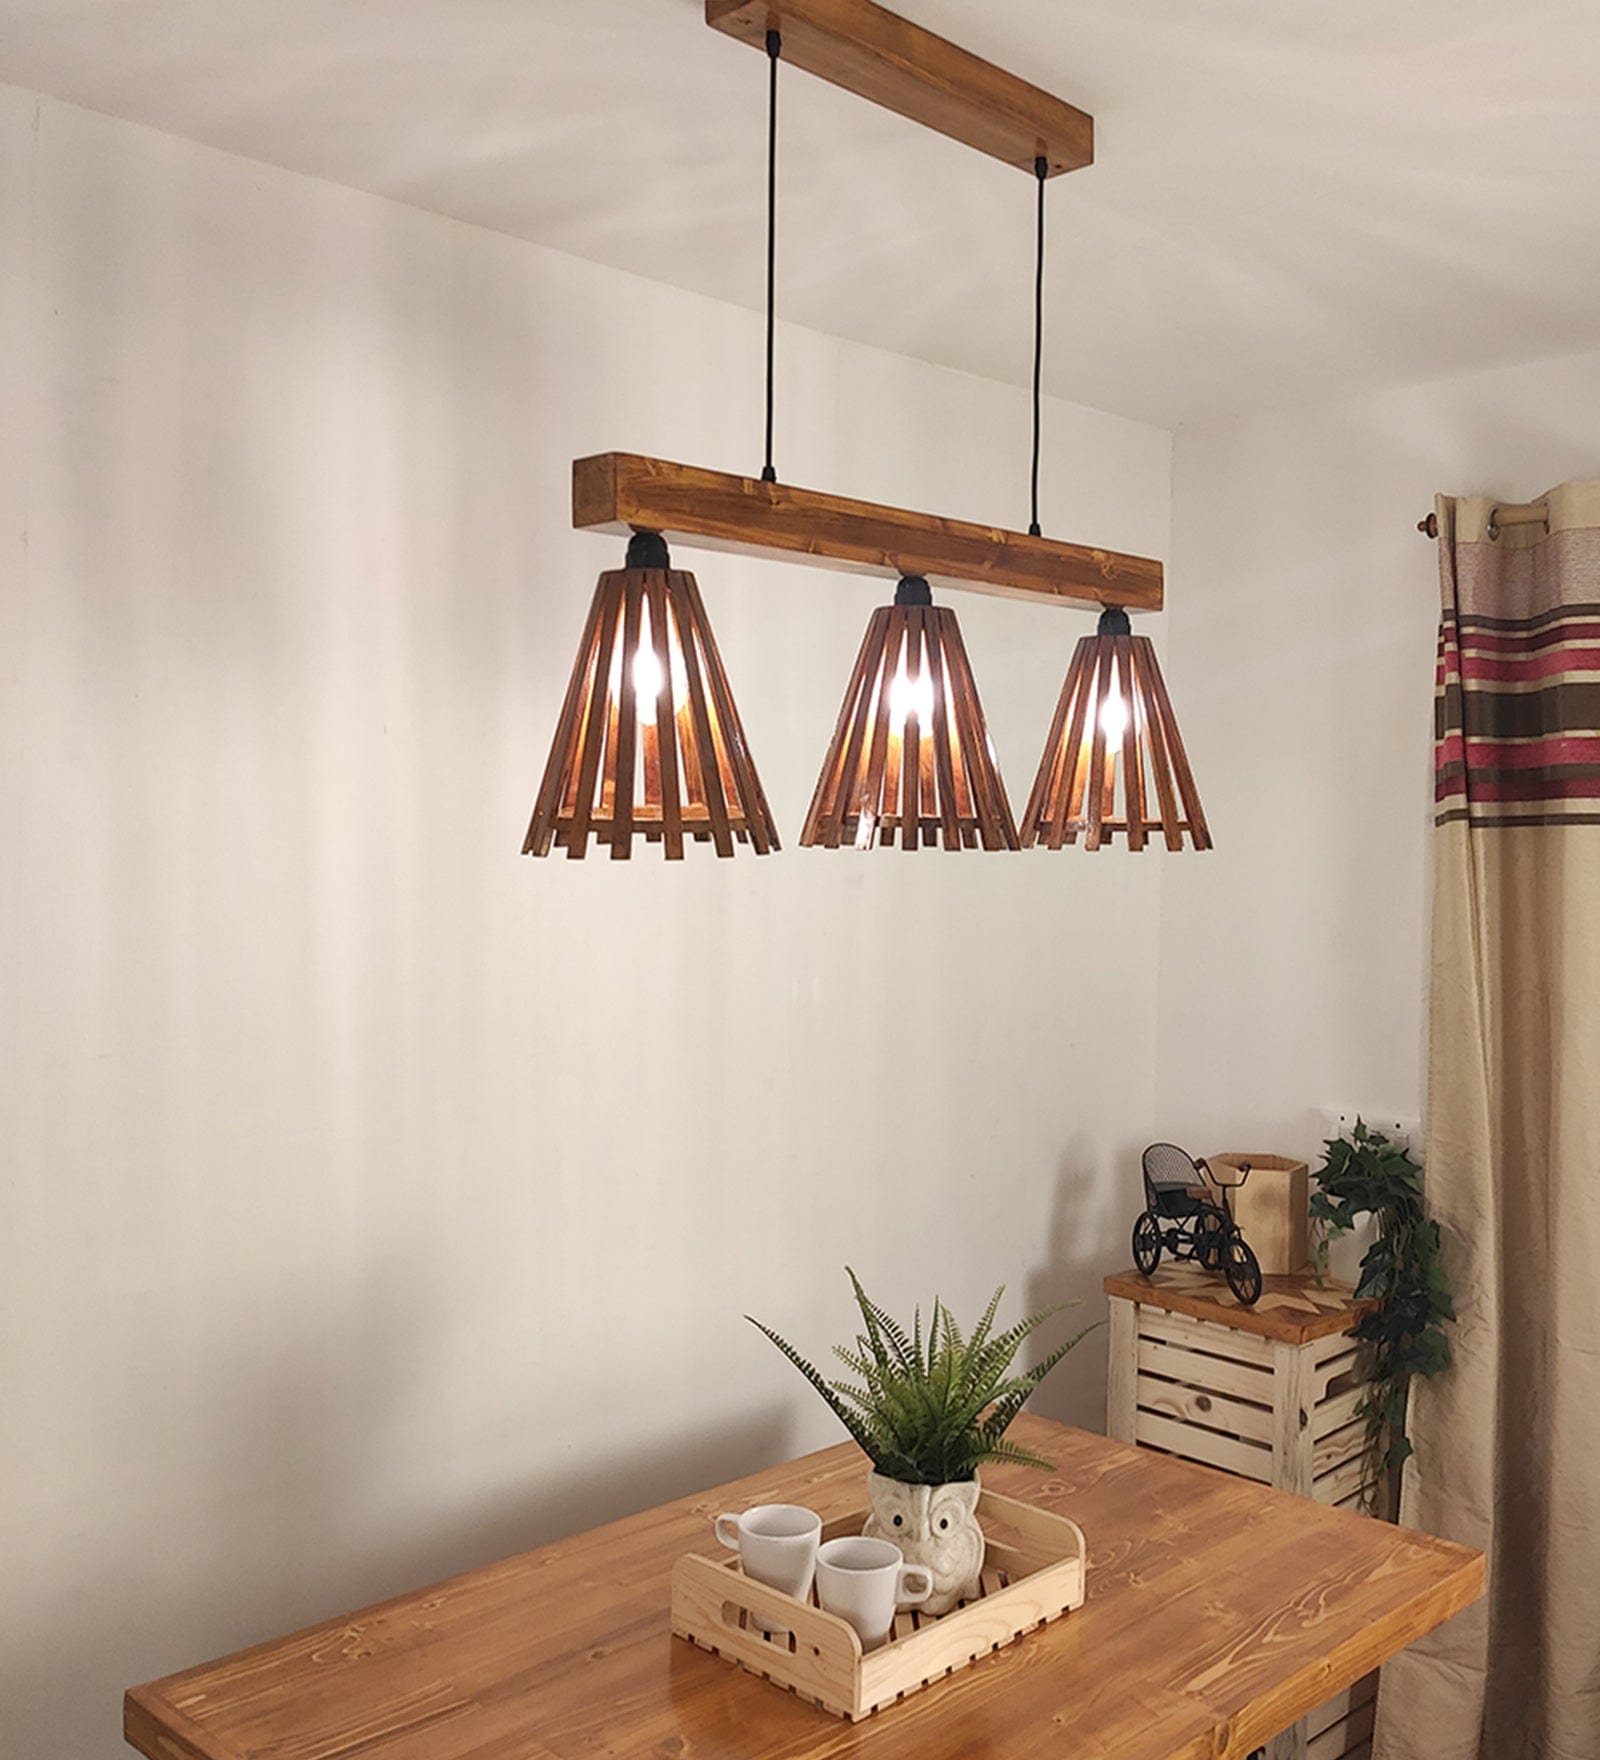 Funnel Brown 3 Series Hanging Lamp (BULB NOT INCLUDED)